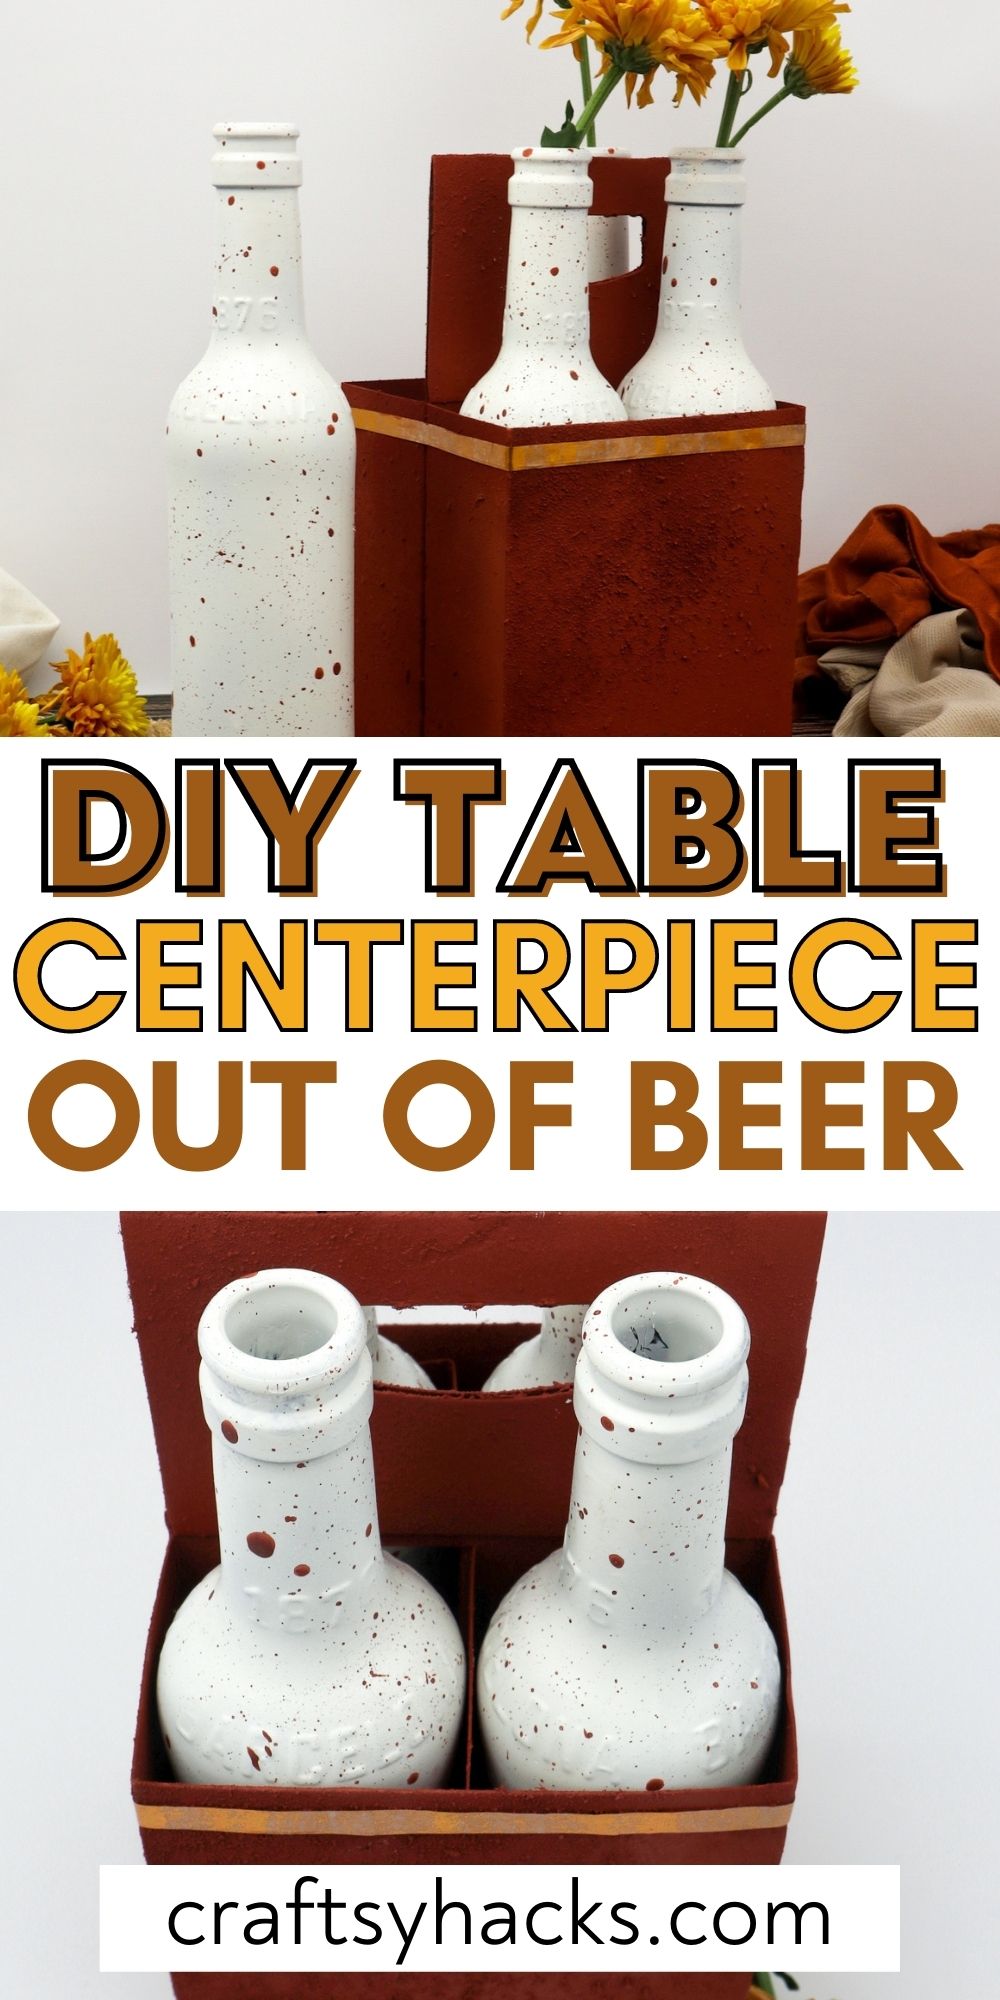 DIY table centerpiece out of beer bottles